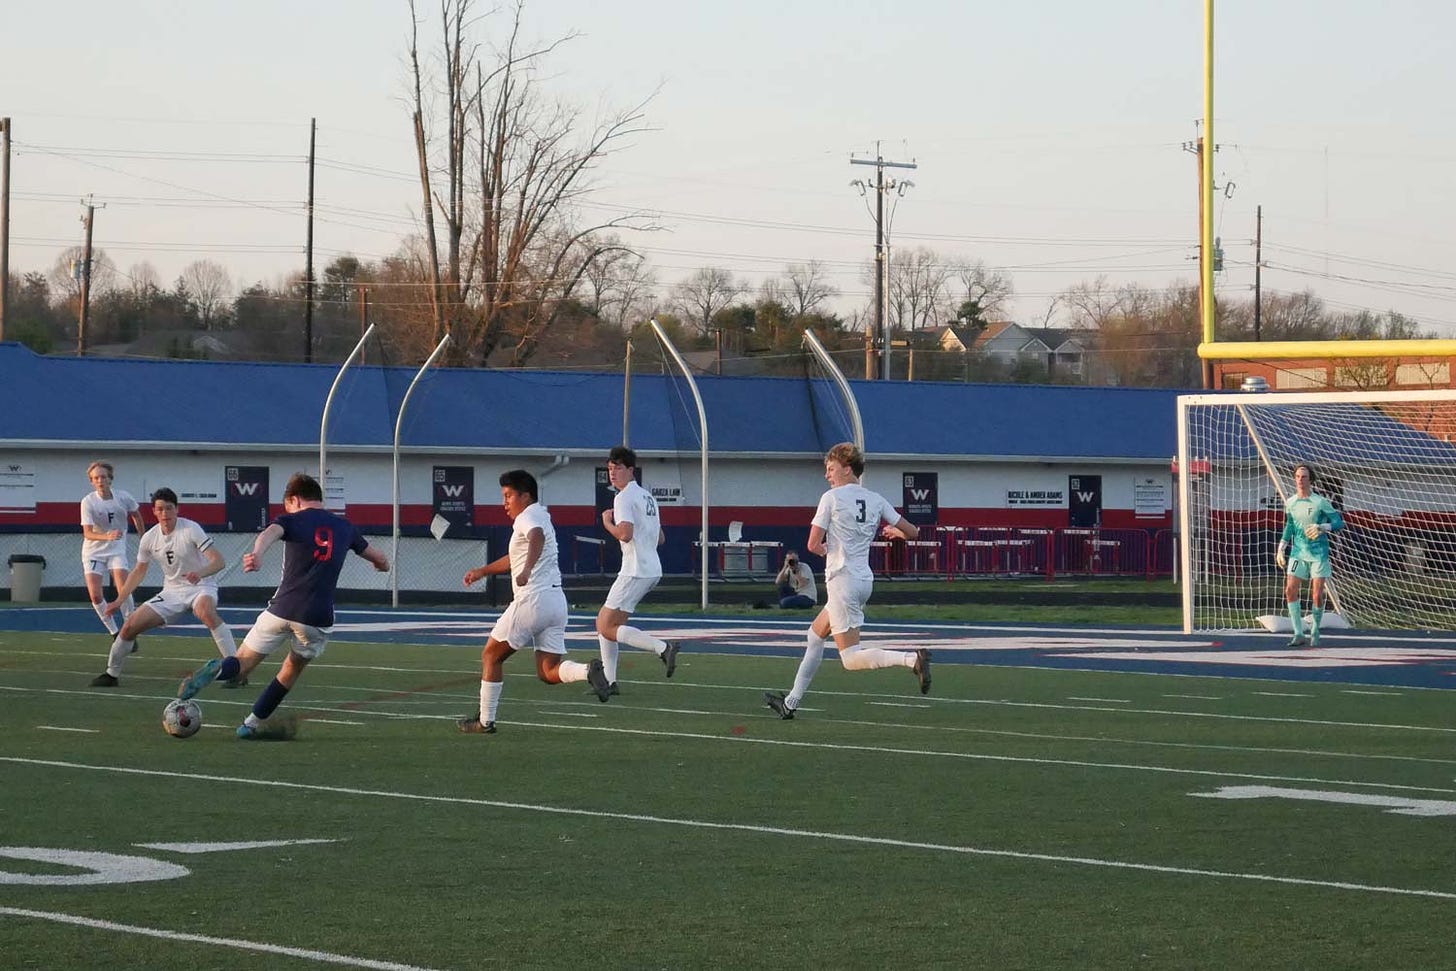 West High boys soccer player shoots at goal